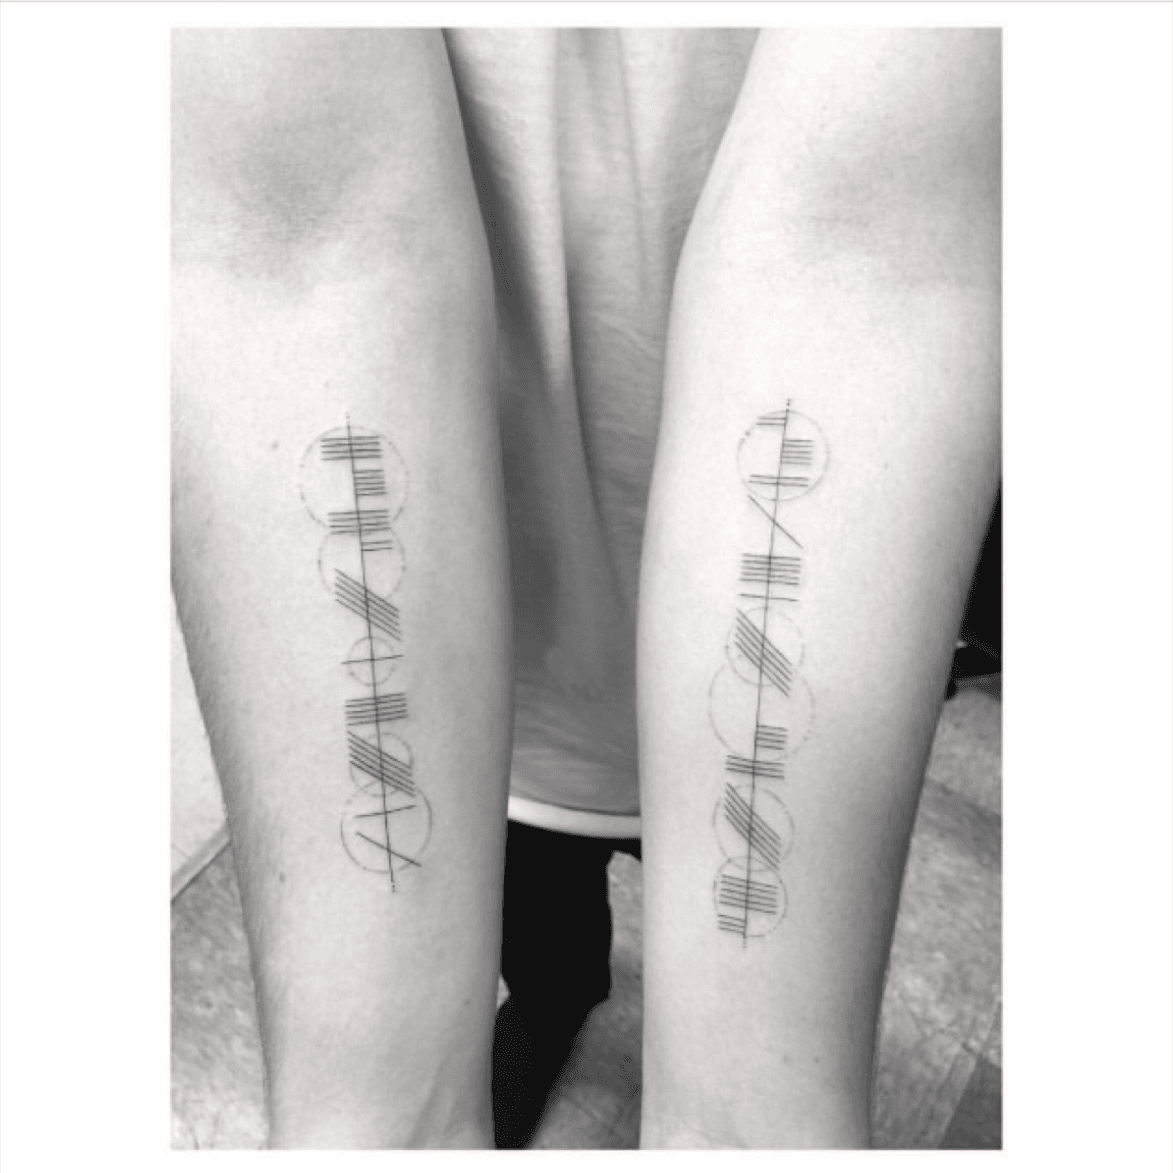 Tattoo uploaded by Emma Mueller  ogham anam cara anamcara soul  friend Irelands oldest language written in ogham Translates to Anam Cara  in gaelic meaning soul friend Also its meaning can be